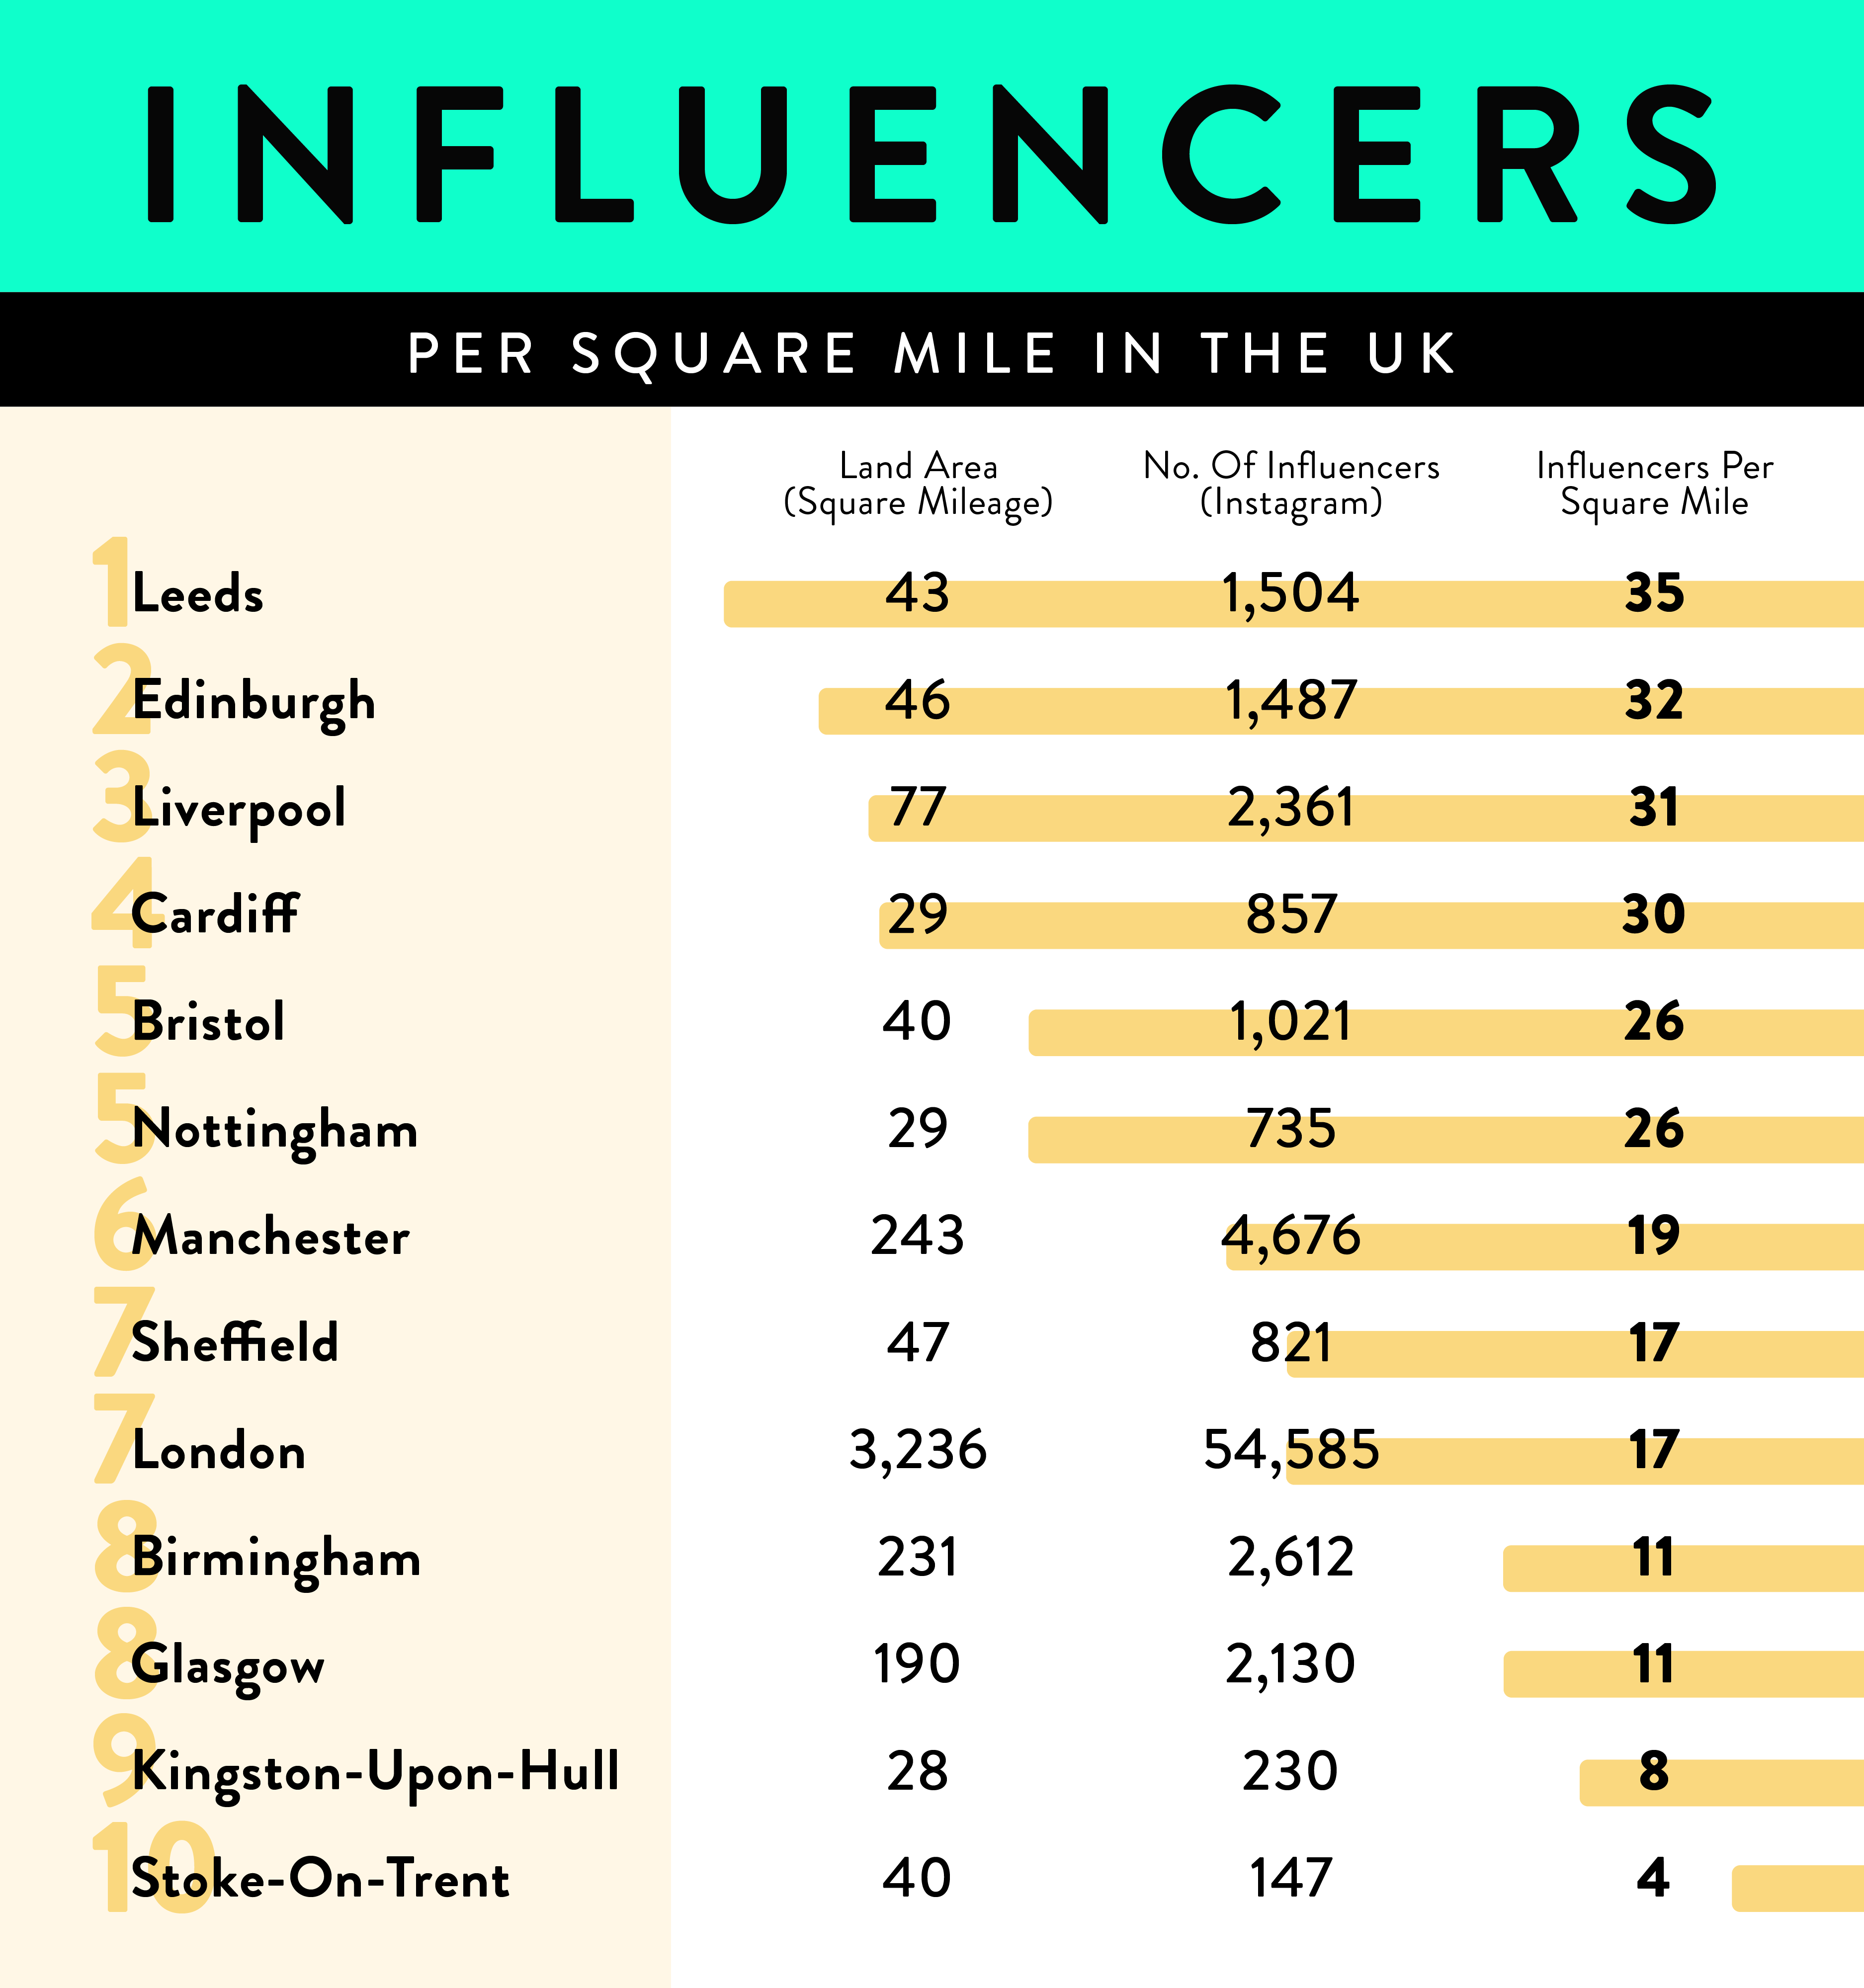 Table of cities in the UK ranked by the number of influencers per square mile